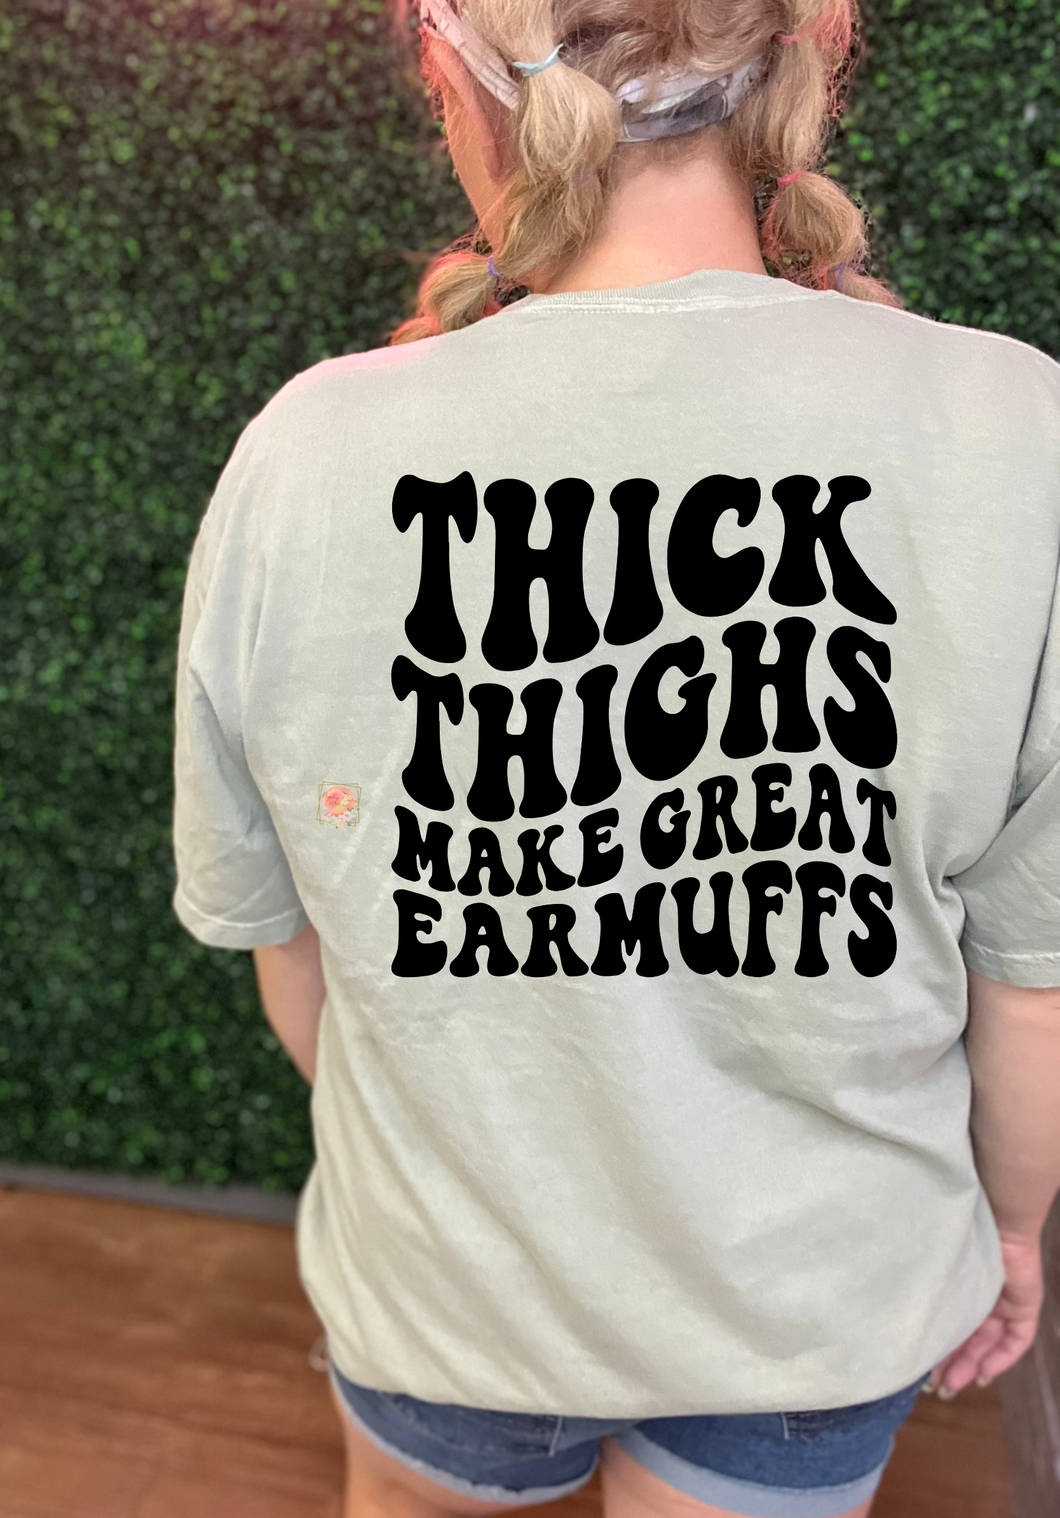 Thick thighs make great earmuffs